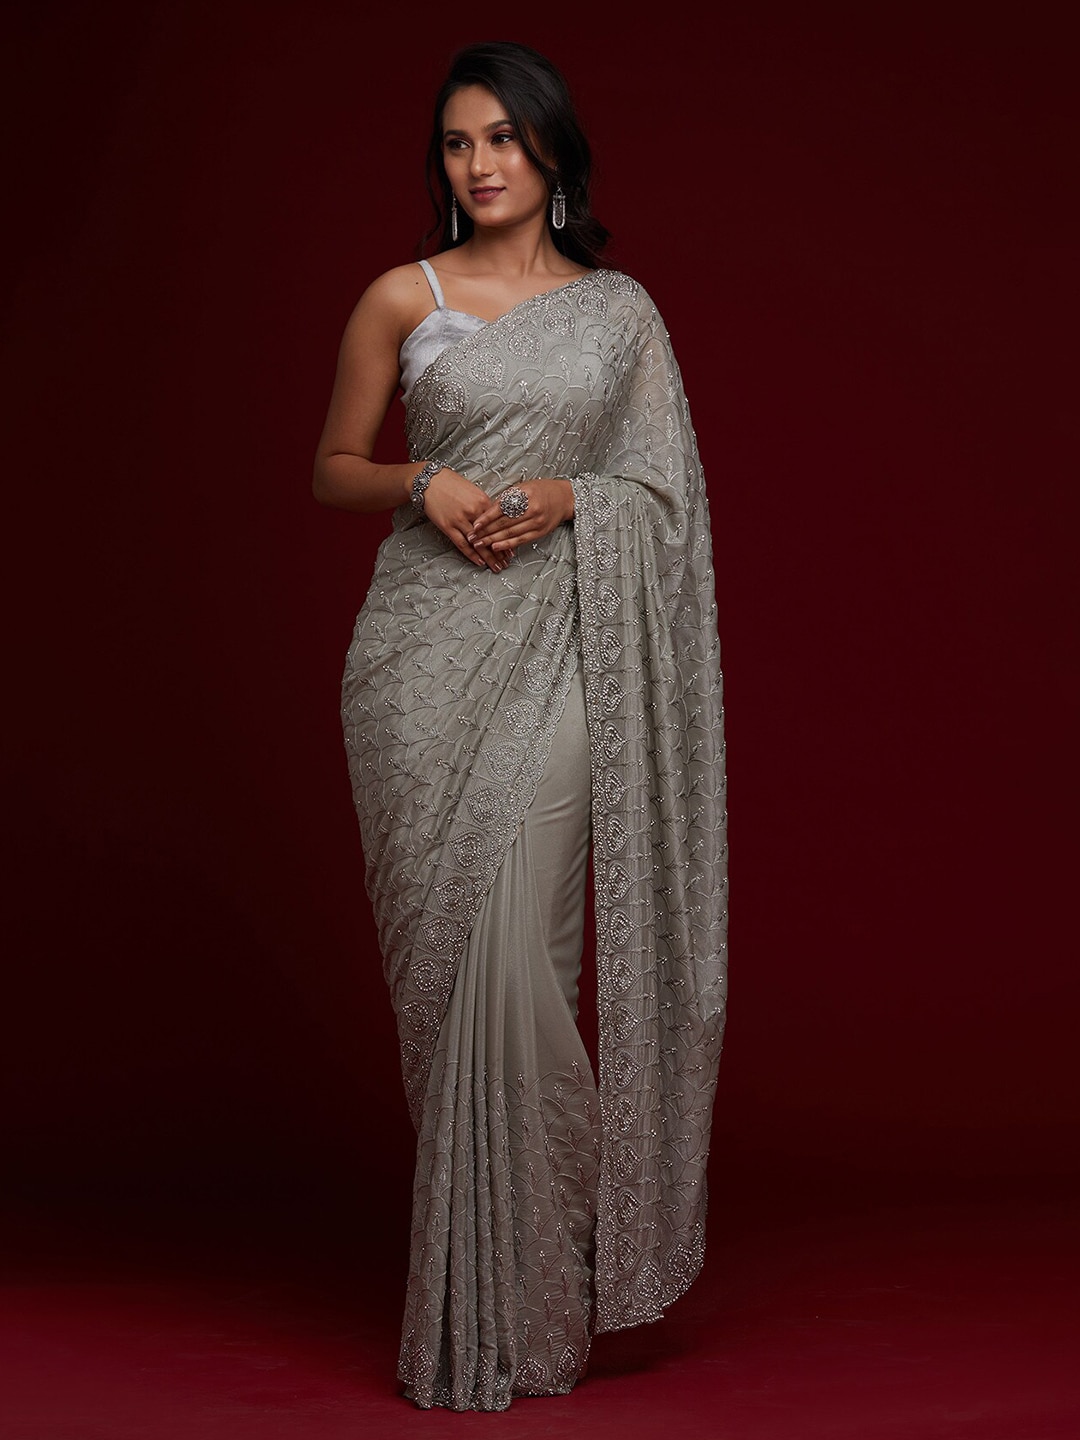 Koskii Grey Floral Embroidered Saree Price in India